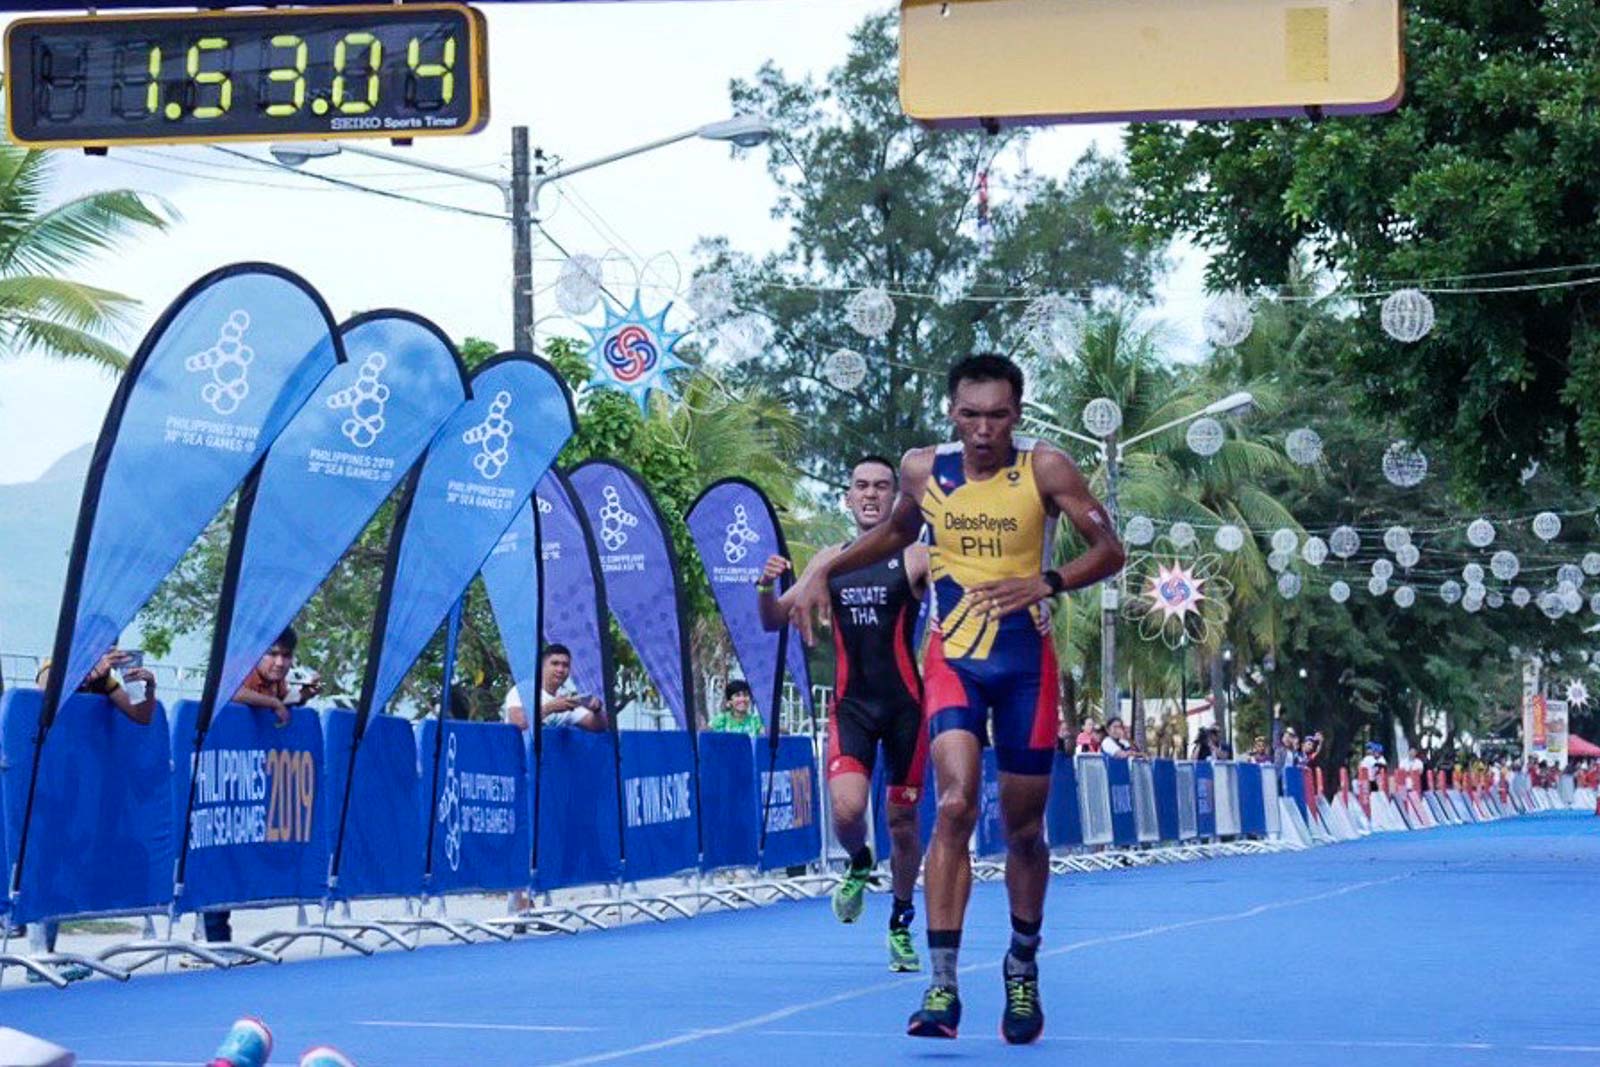 GALLANT FIGHT. Joey delos Reyes puts Philippine duathlon on the medal board. Photo by Marga Deona/Rappler 